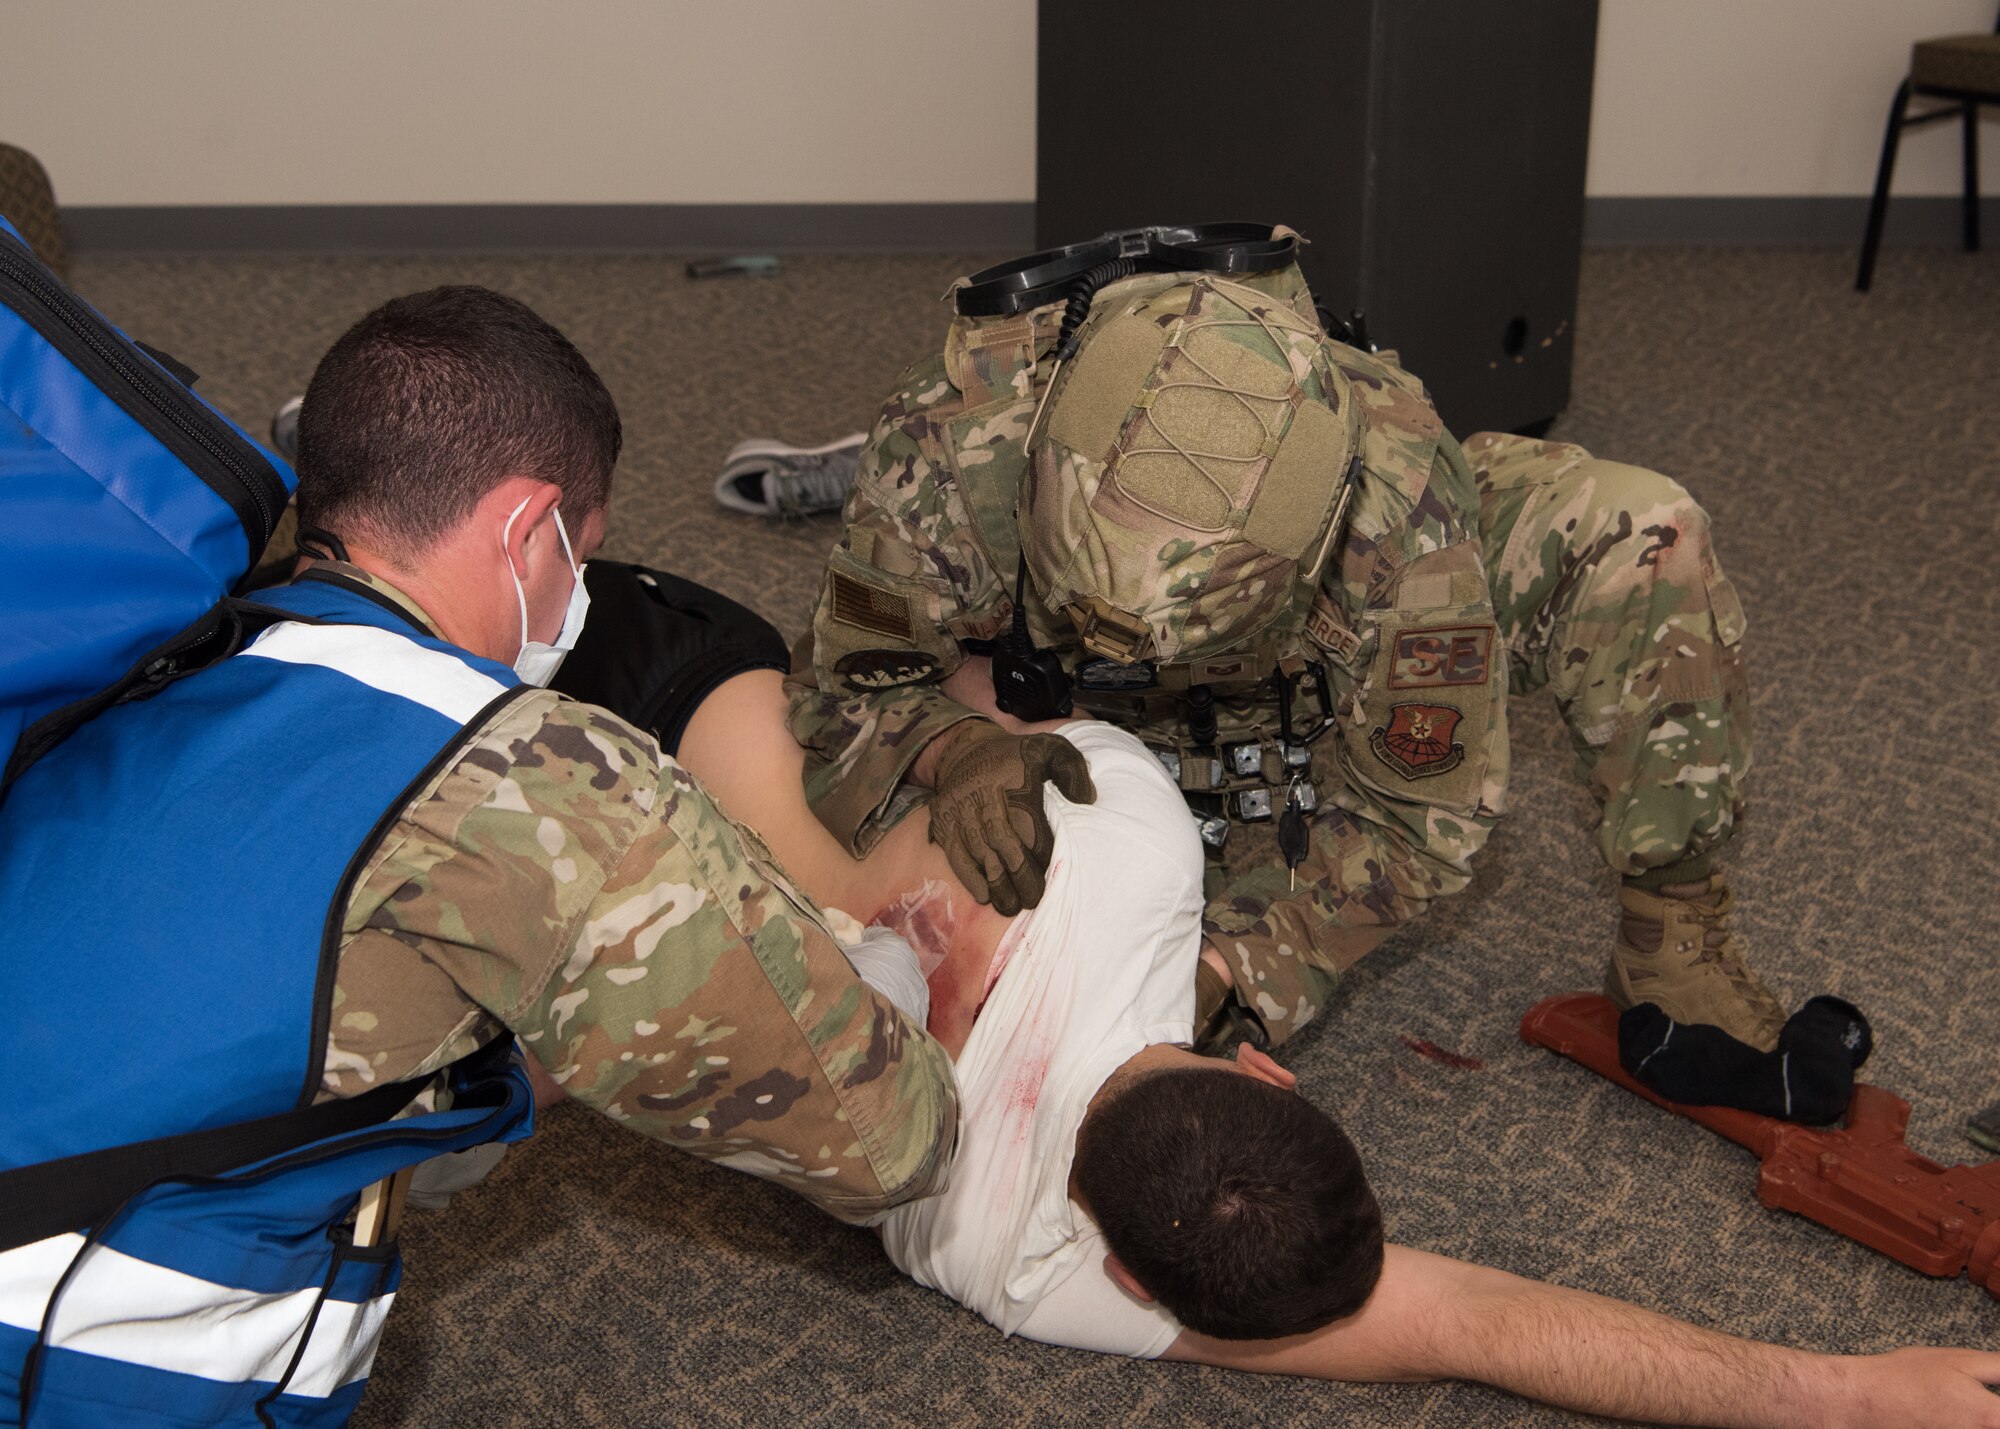 Two Airmen treat a the wounds of a simulated casualty.